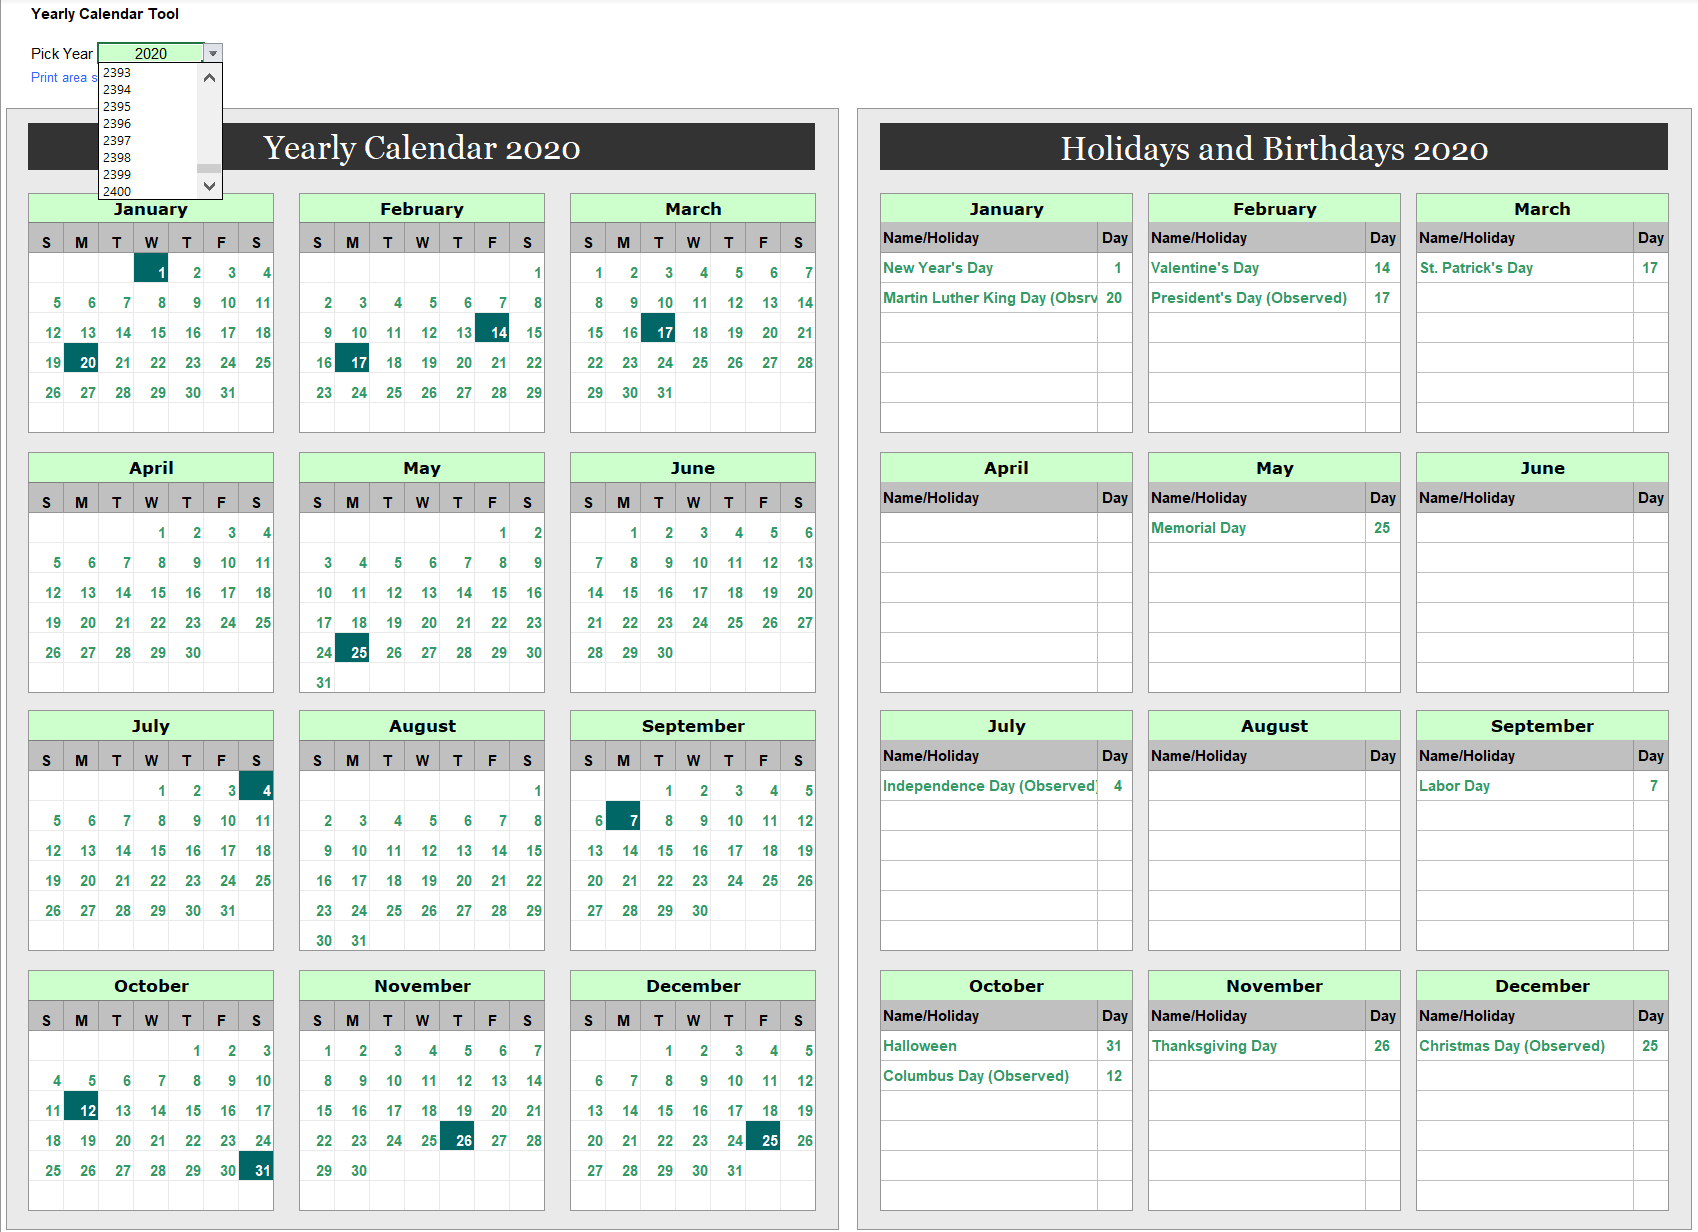 Project management tool - Dynamic yearly calendar